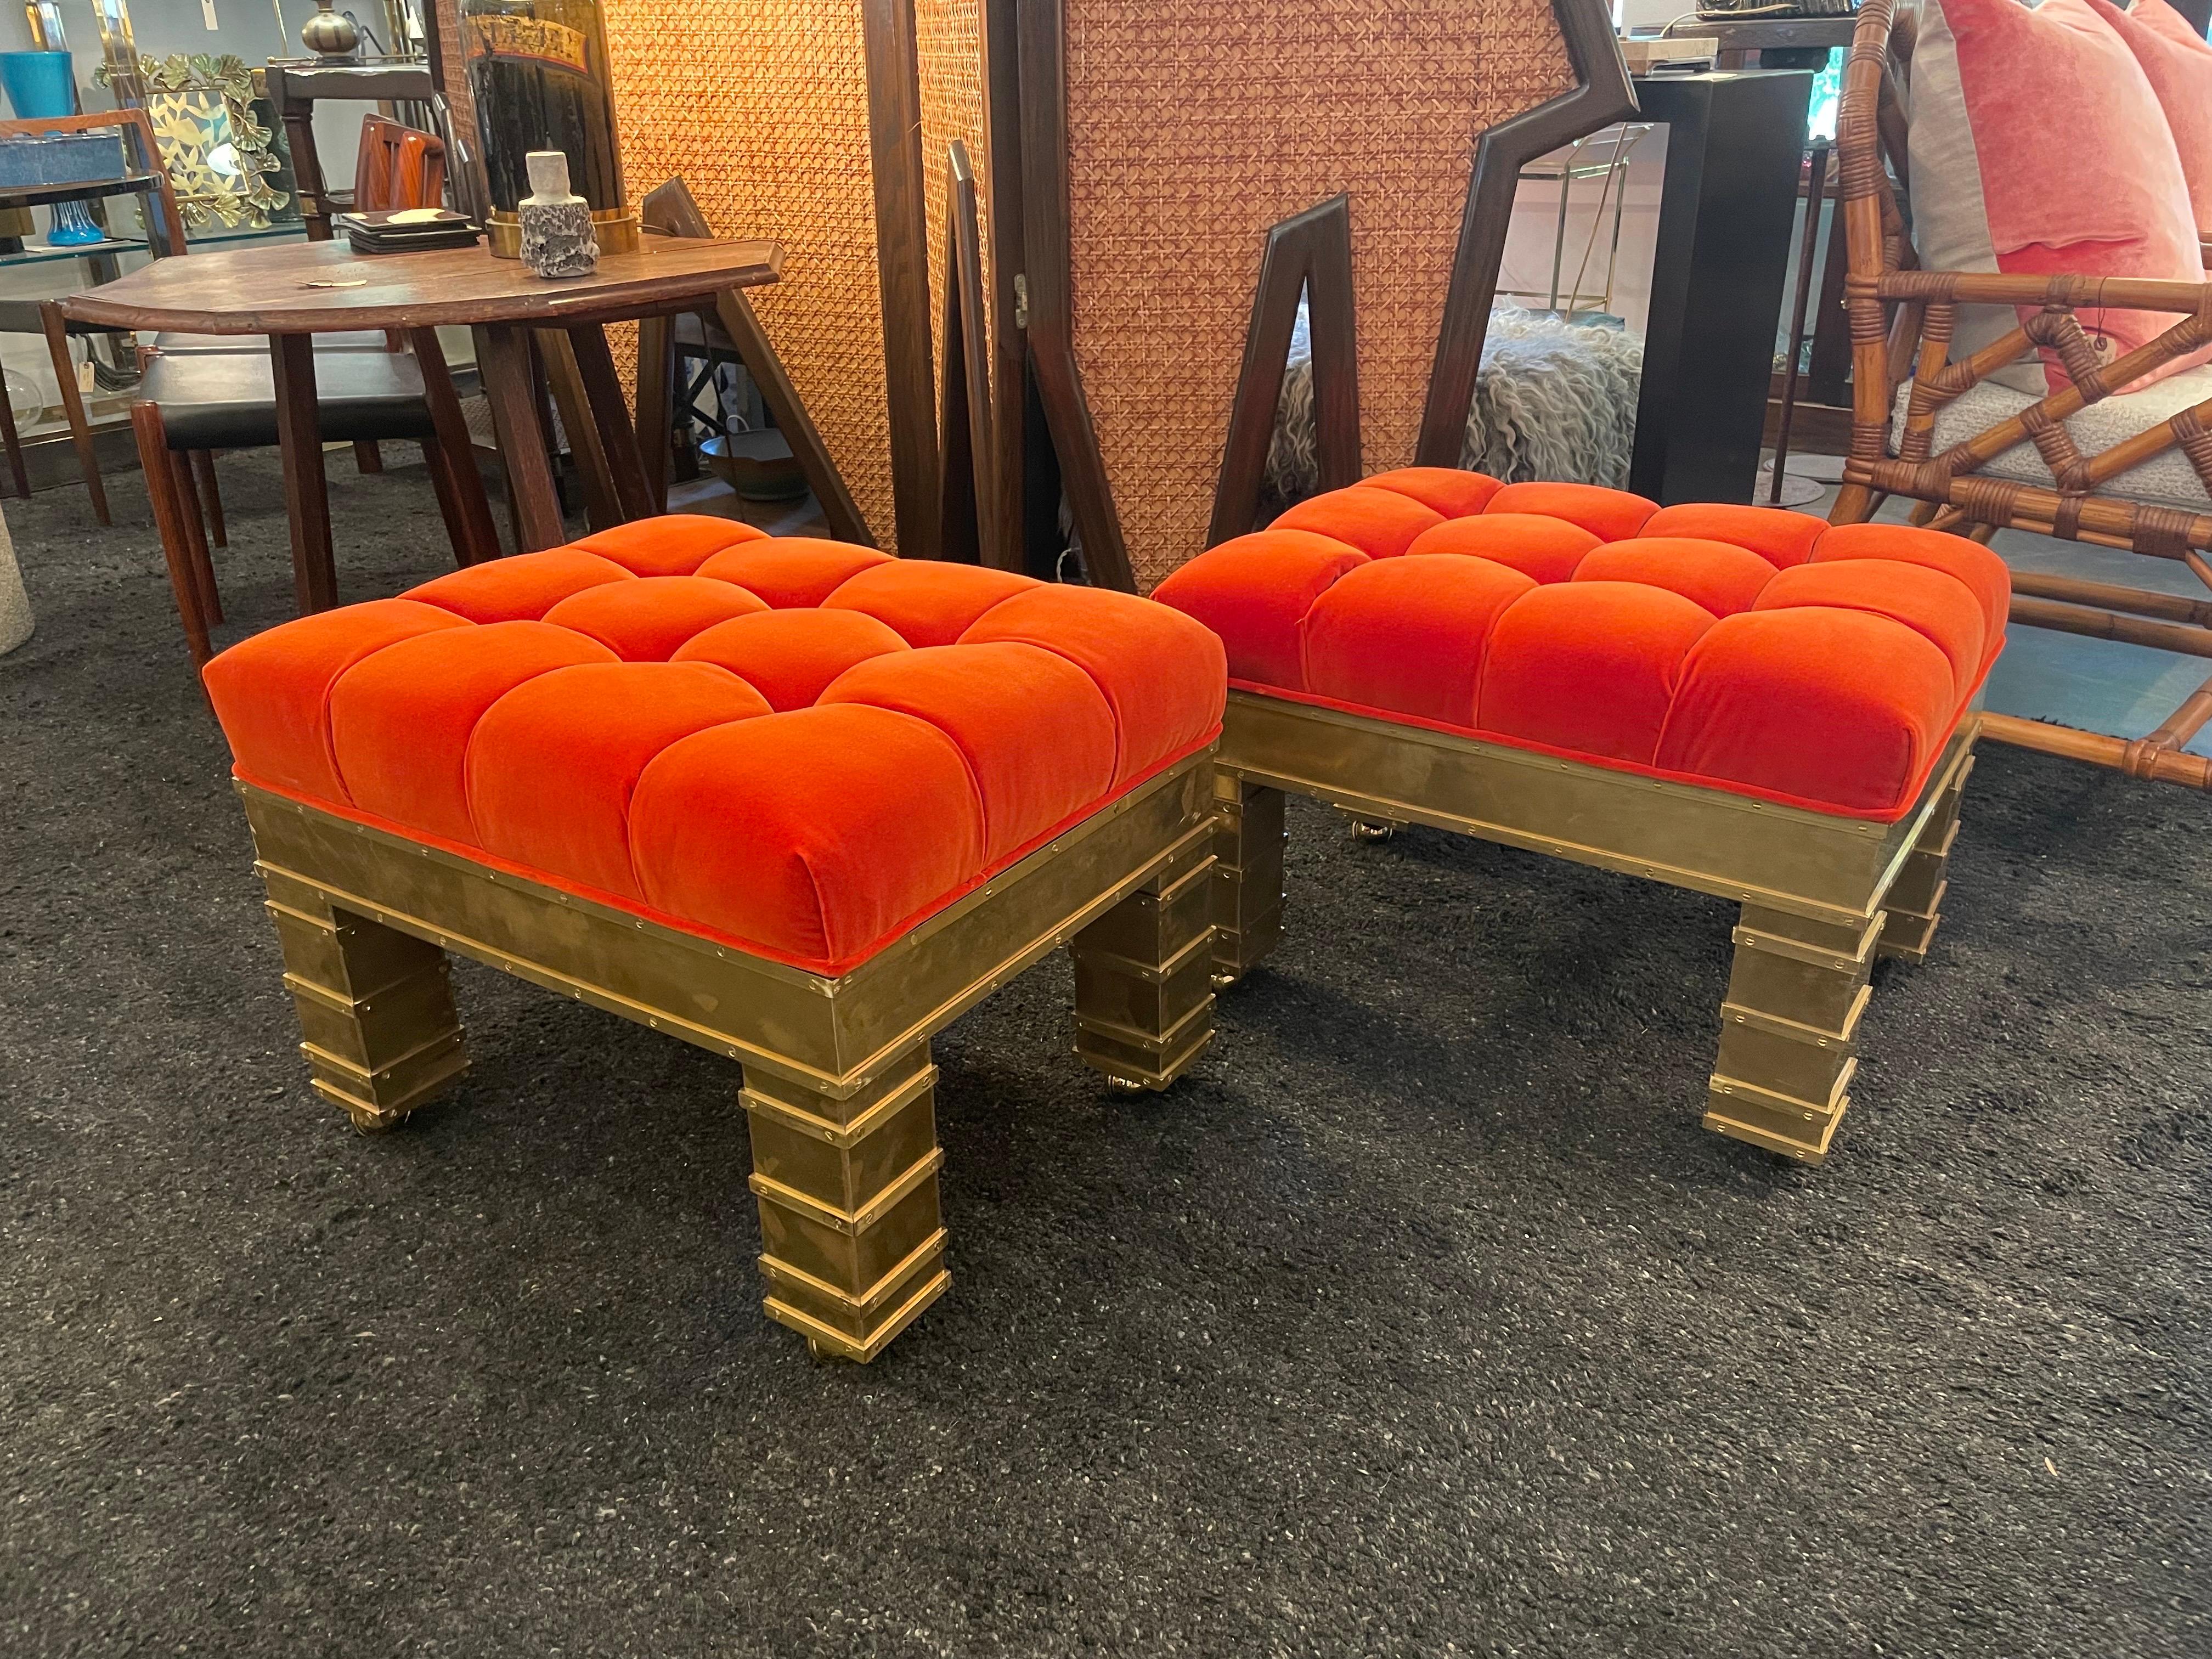 20th Century Italian Artisan Crafted Brass and Velvet Benches on Casters, '4 Avail' For Sale